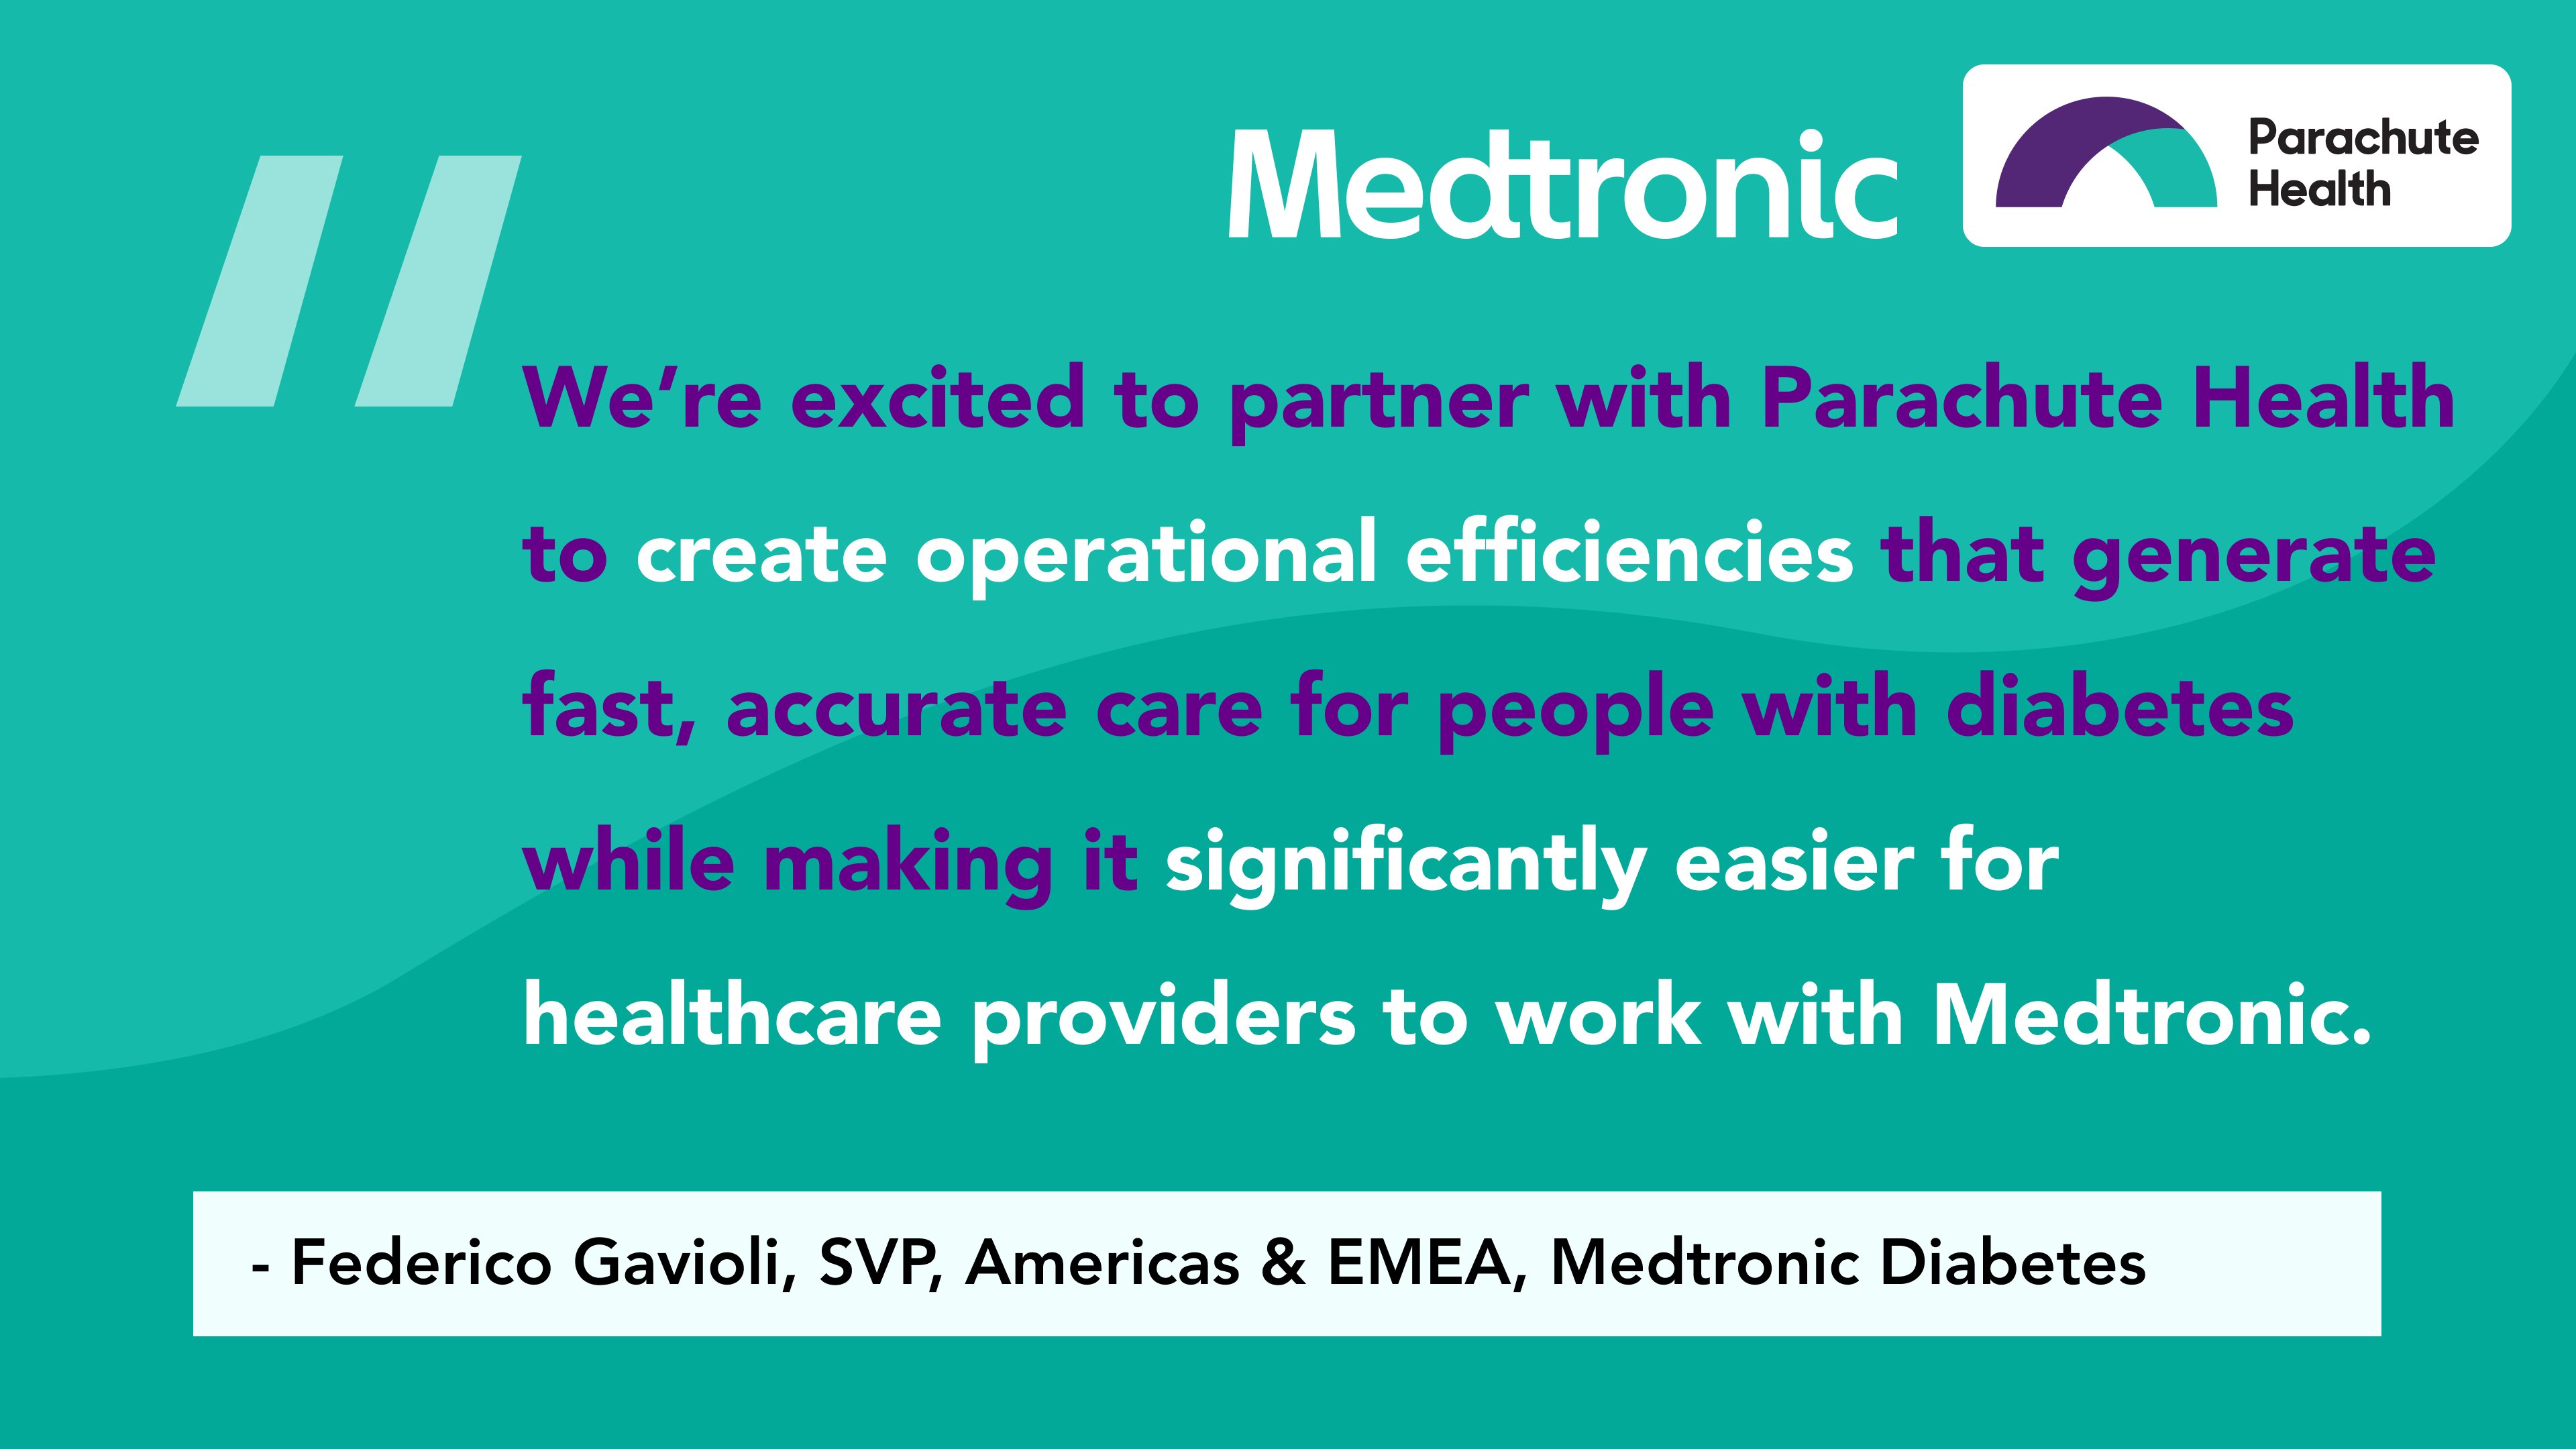 Parachute Health and Medtronic Diabetes announced that Parachute Health’s ePrescribing Platform will be leveraged by Medtronic Diabetes to simplify the experience for healthcare providers and their patients when ordering the life-changing diabetes technology and supplies.